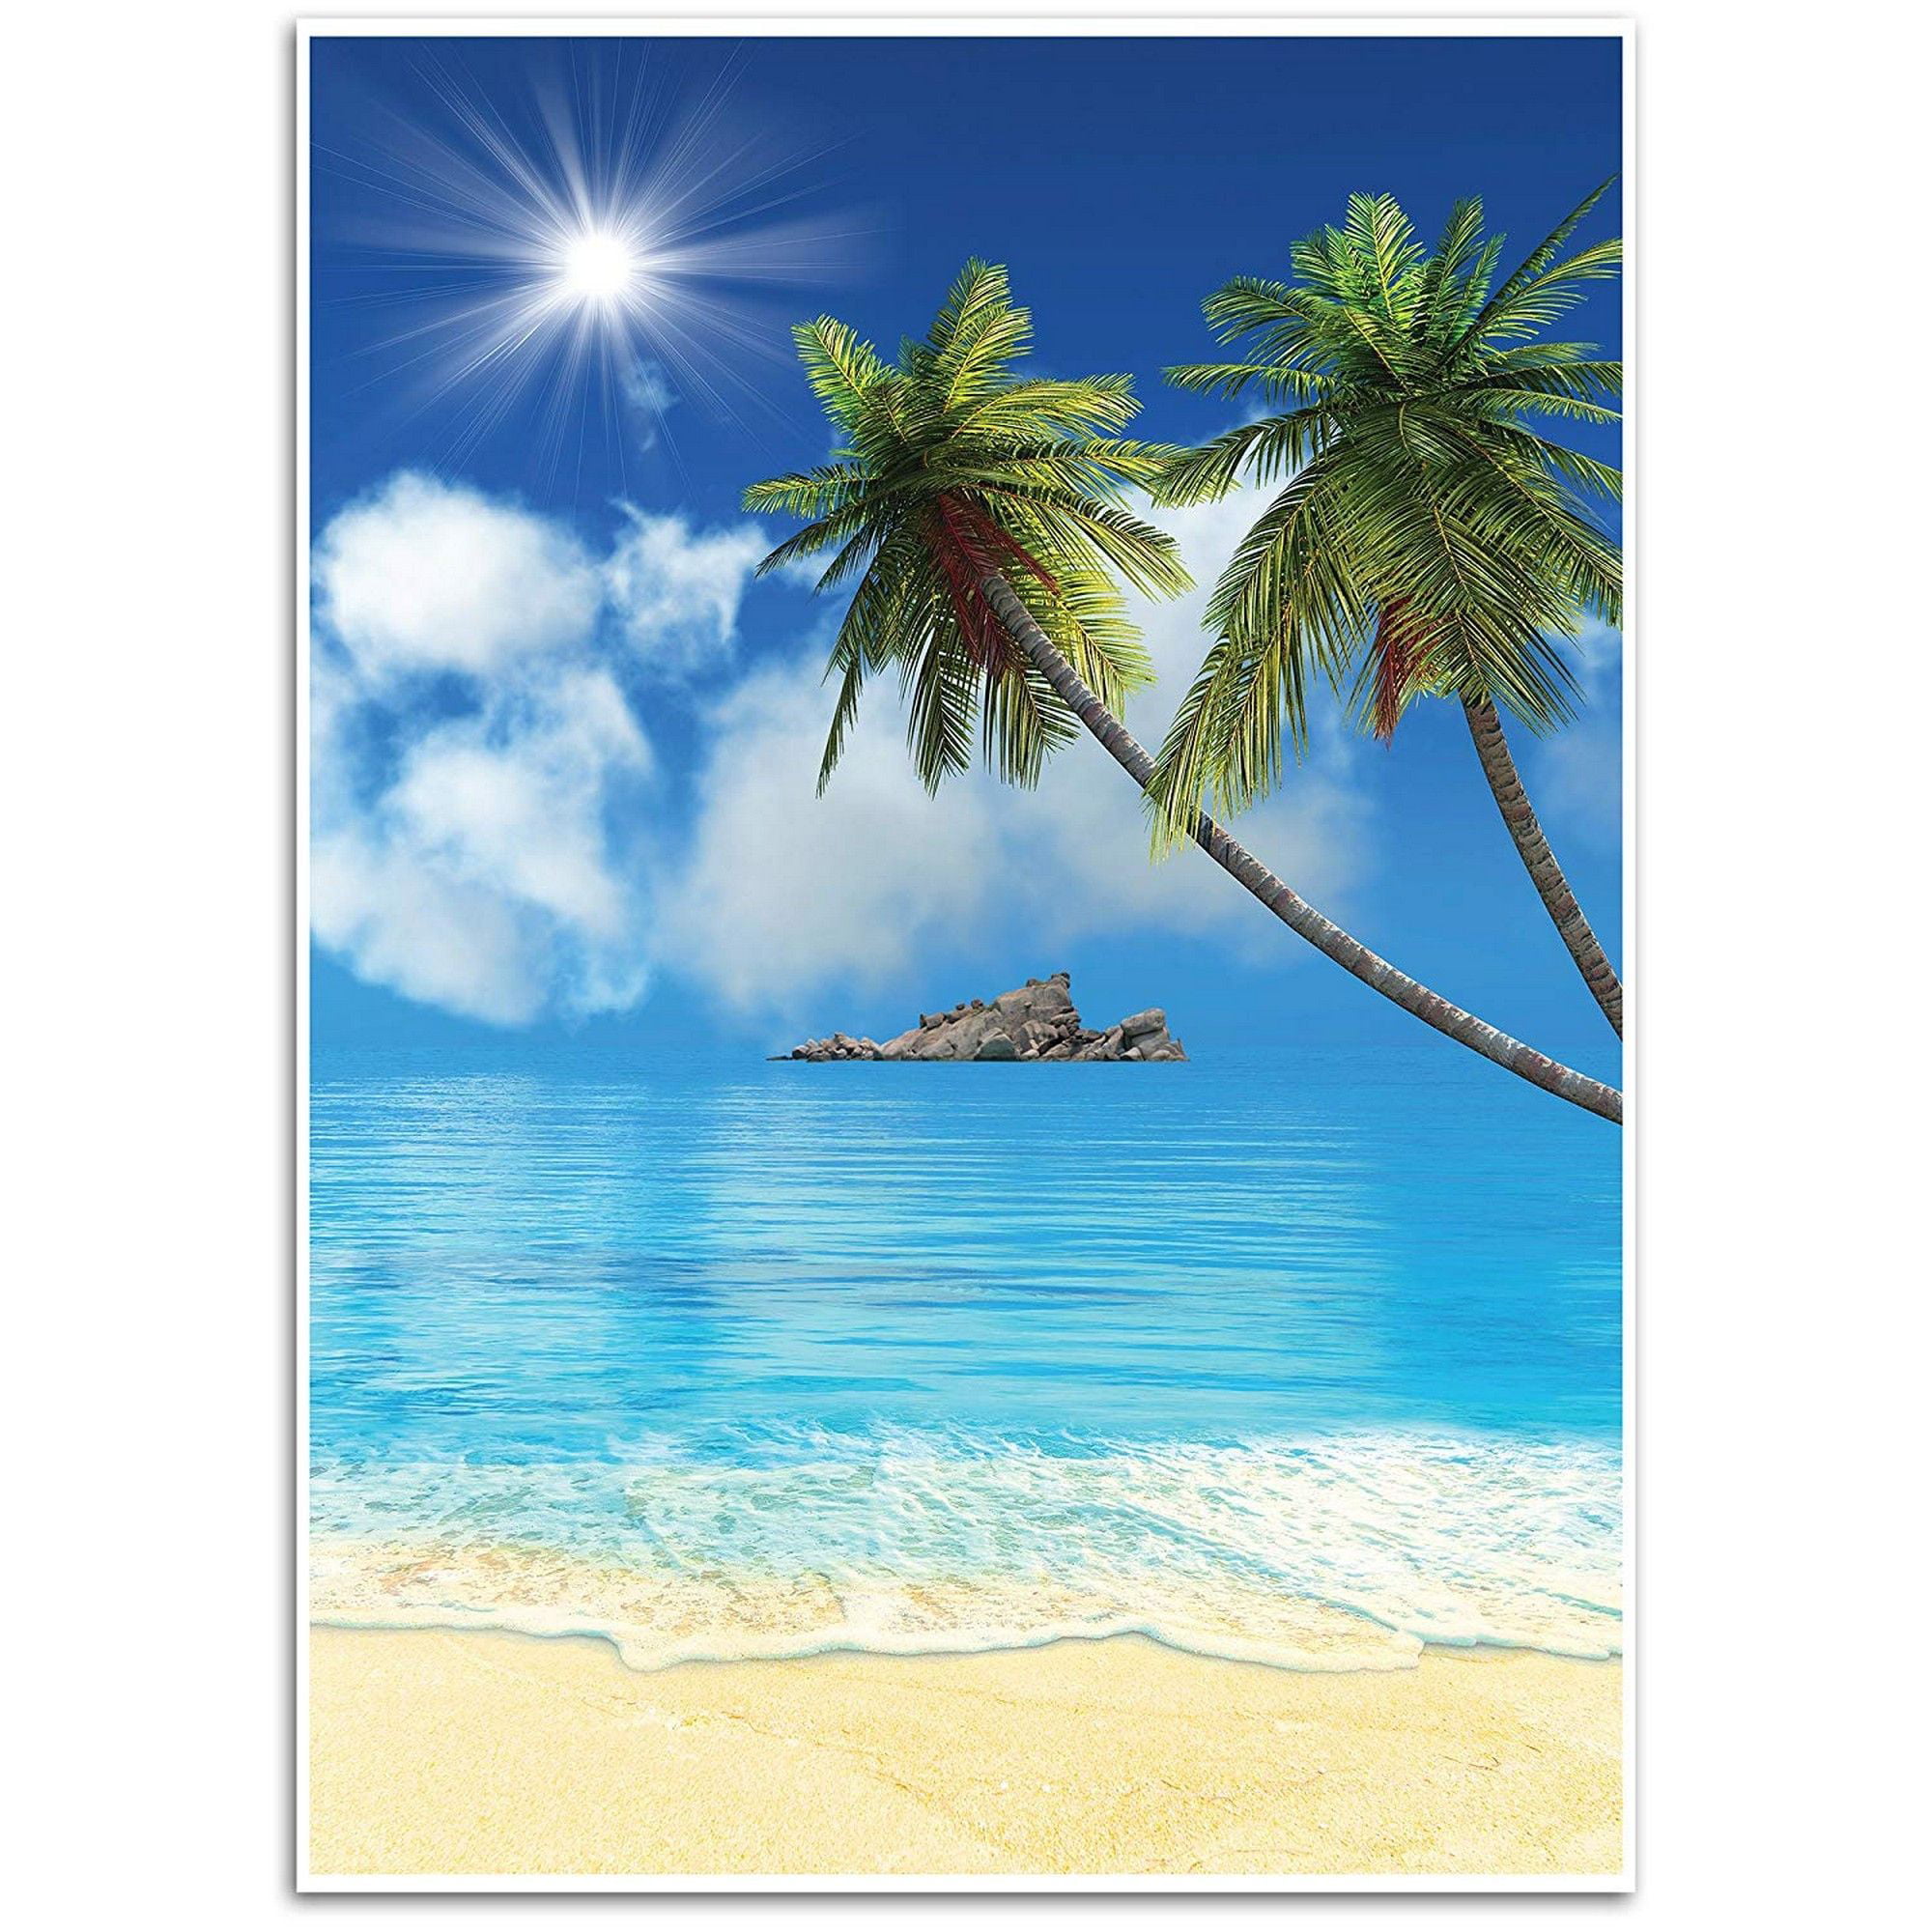 Chic Beach Backdrop Tropical Ocean Chic Seaside Sunny Blue Sky with White Cloud Sunshine Big sea Wave Printed Fabric Photography Background G0158, 12’ Wide by 8 Tall 